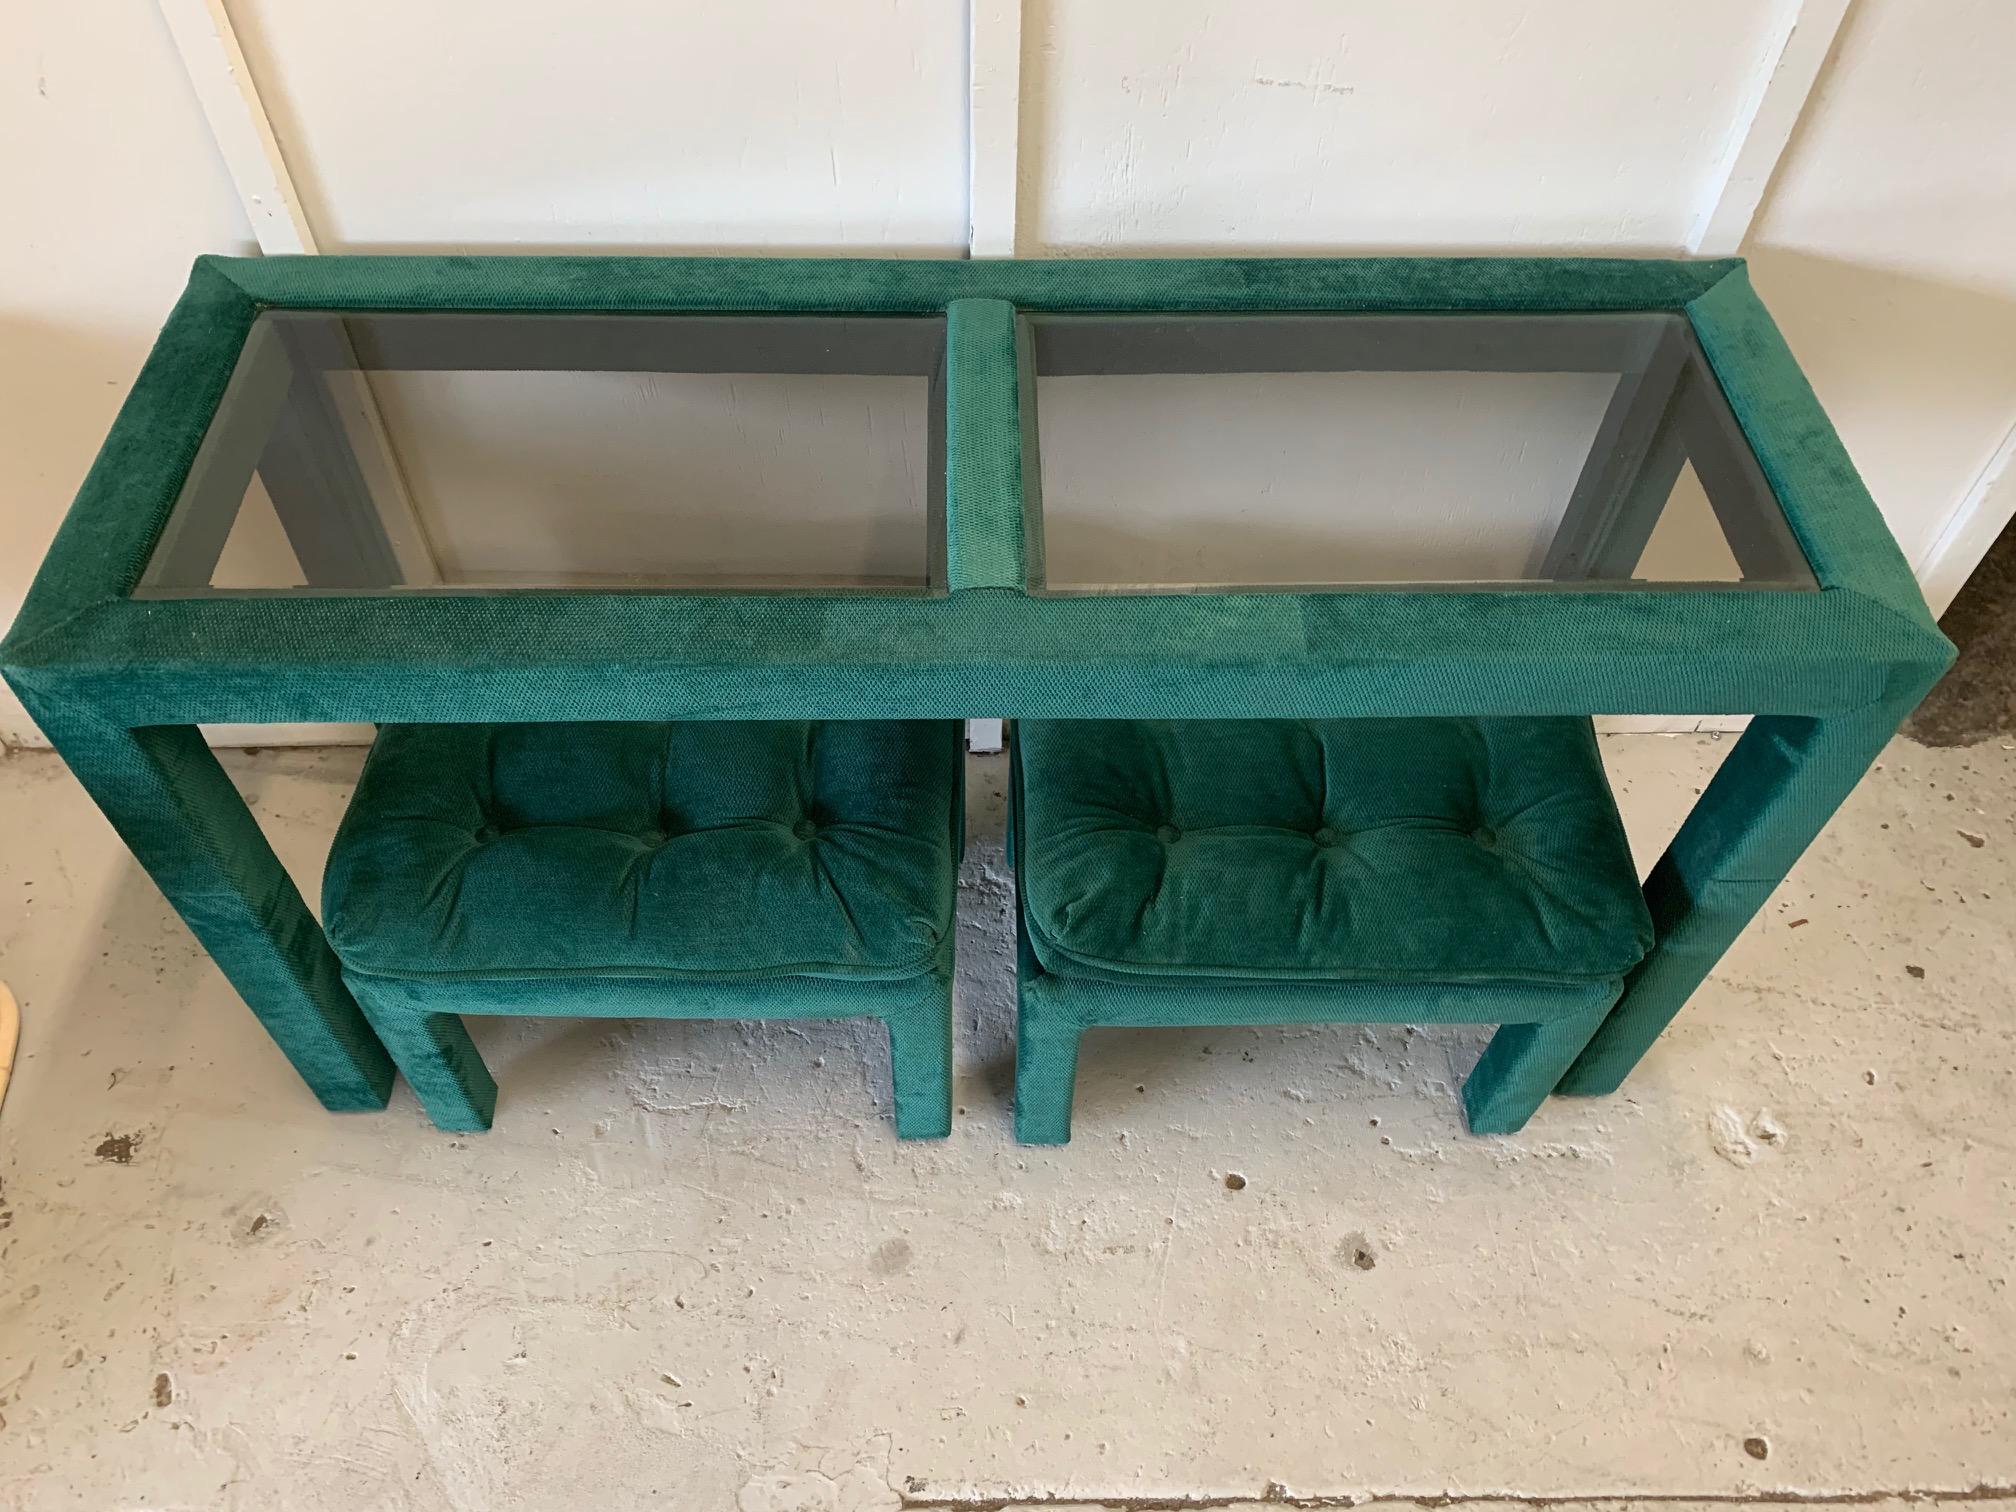 Unique upholstered console table features glass inserts and matching upholstered foot stools. Stools can be used as ottomans or benches as well. Very good condition with only very minor imperfections consistent with age.  T7878